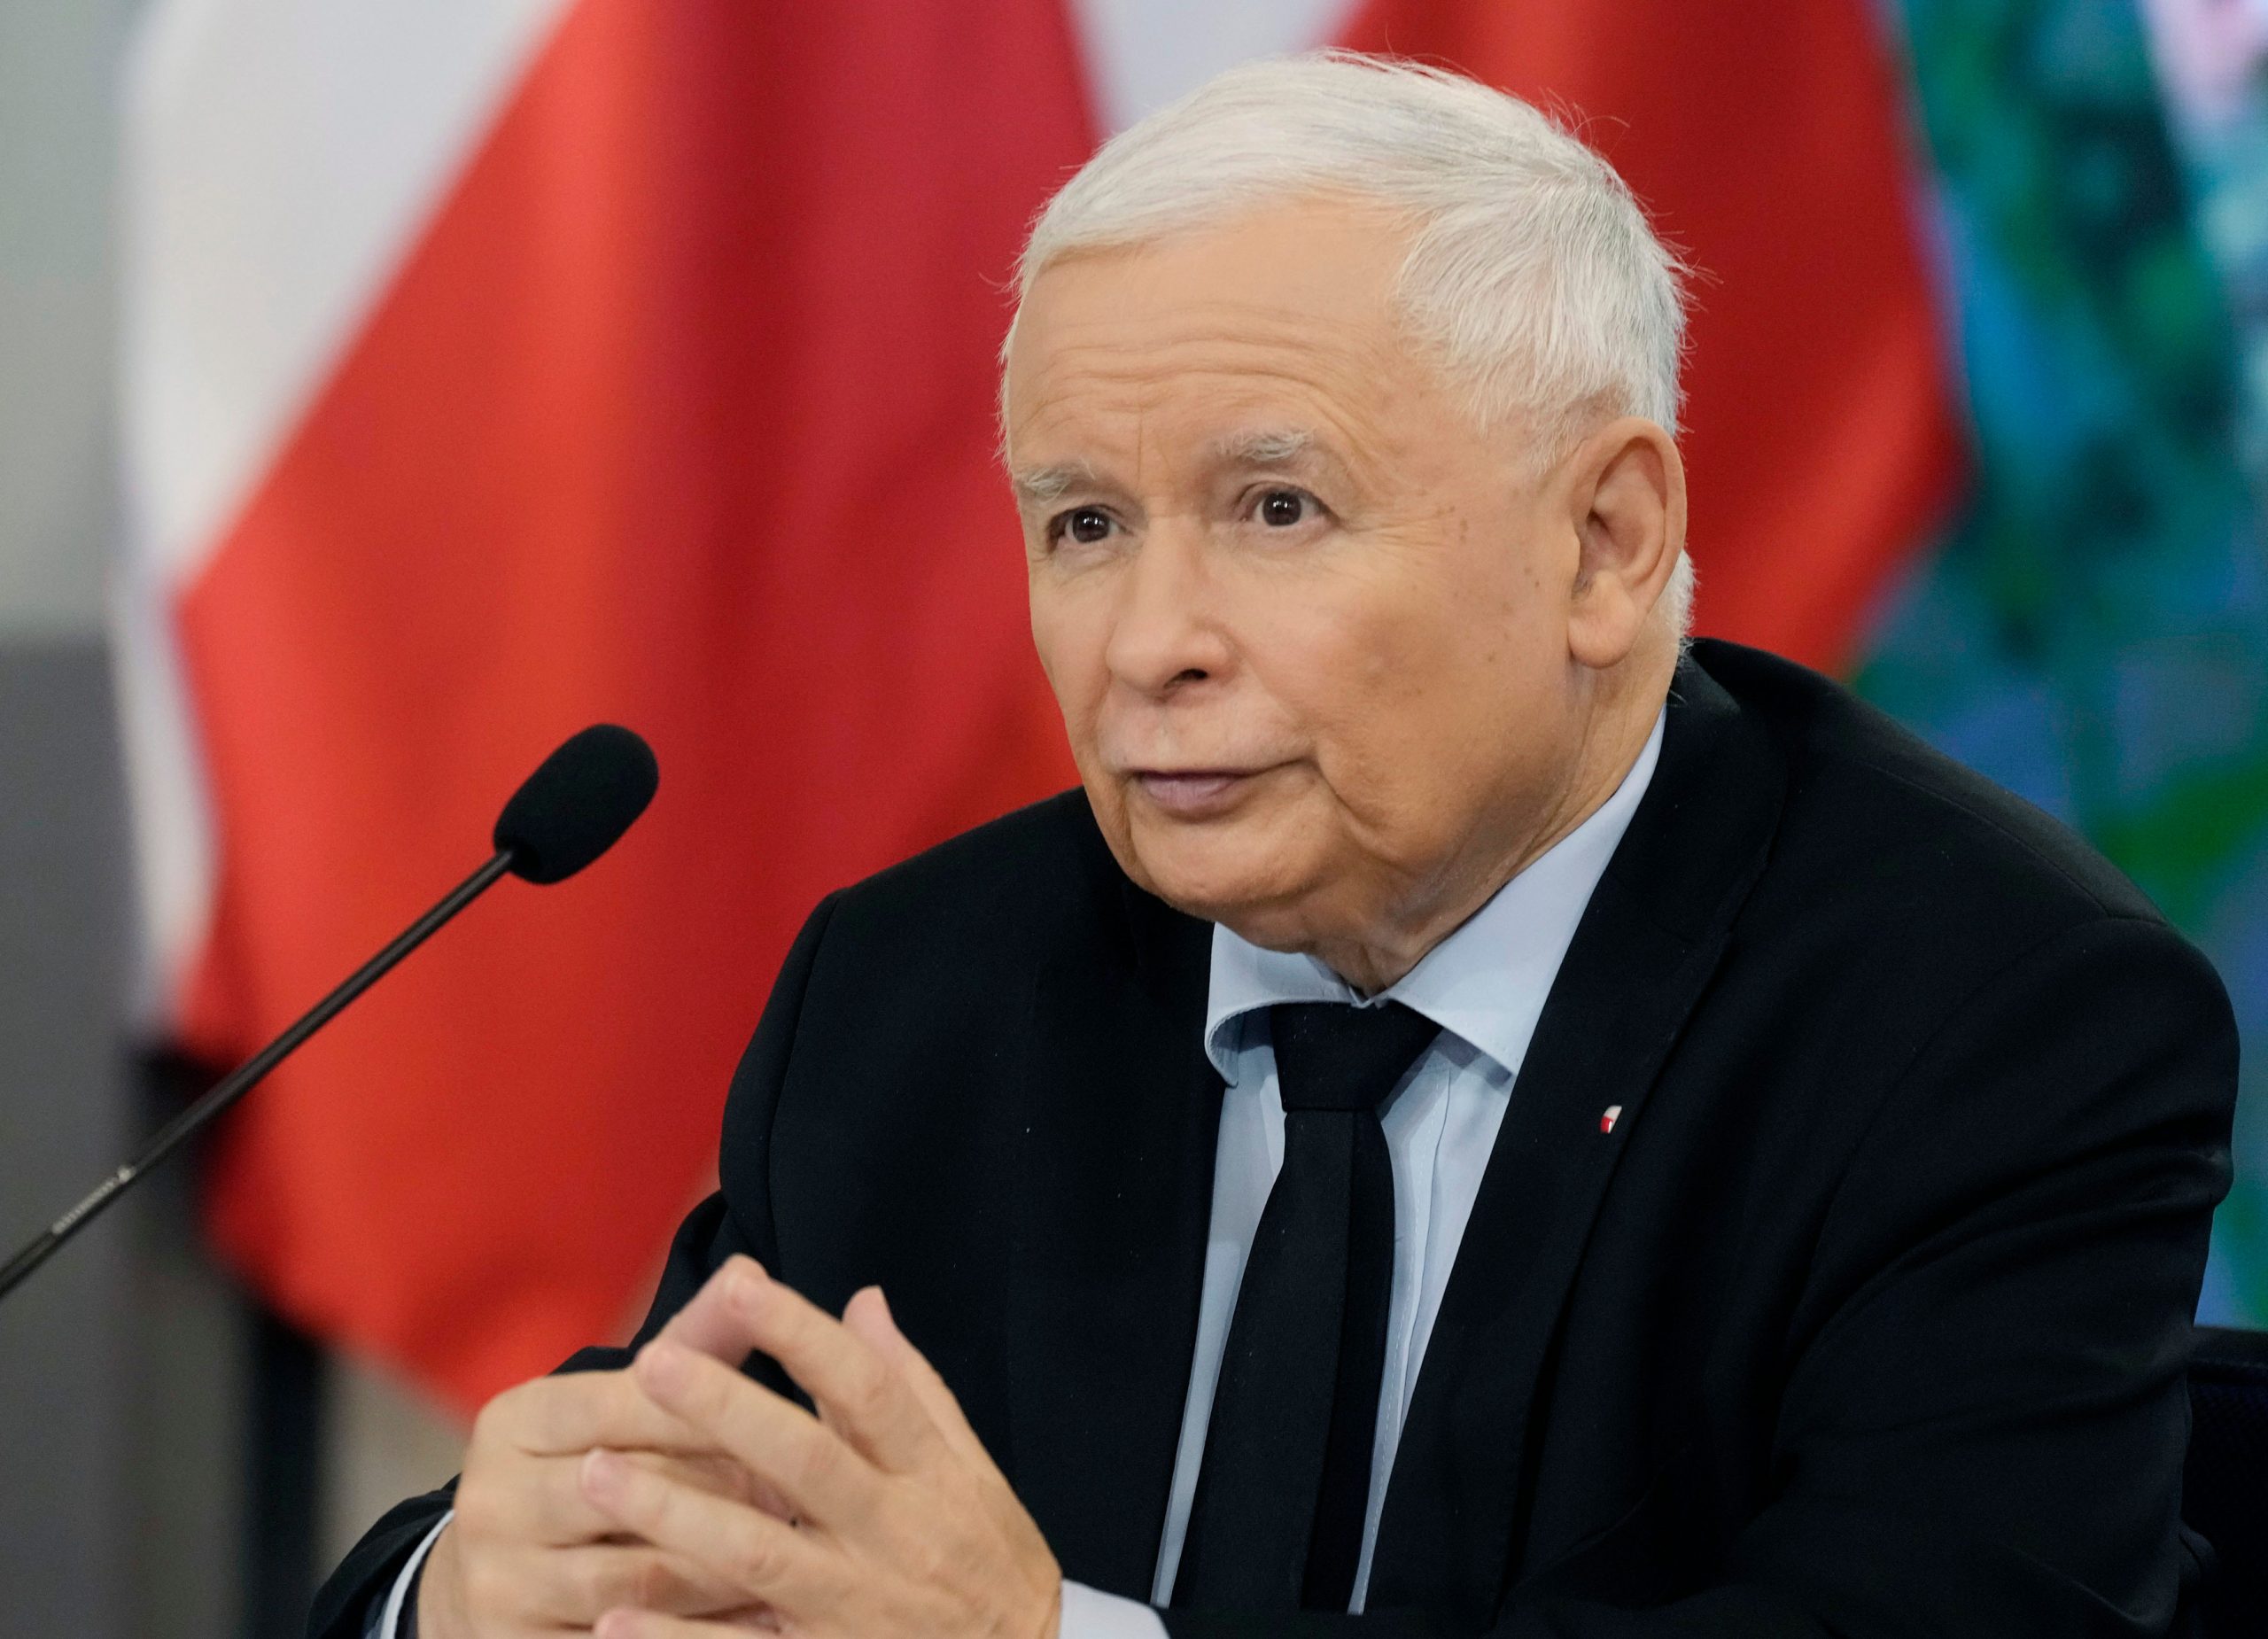 Poland admits use of Israeli spyware, denies its use on opposition leaders